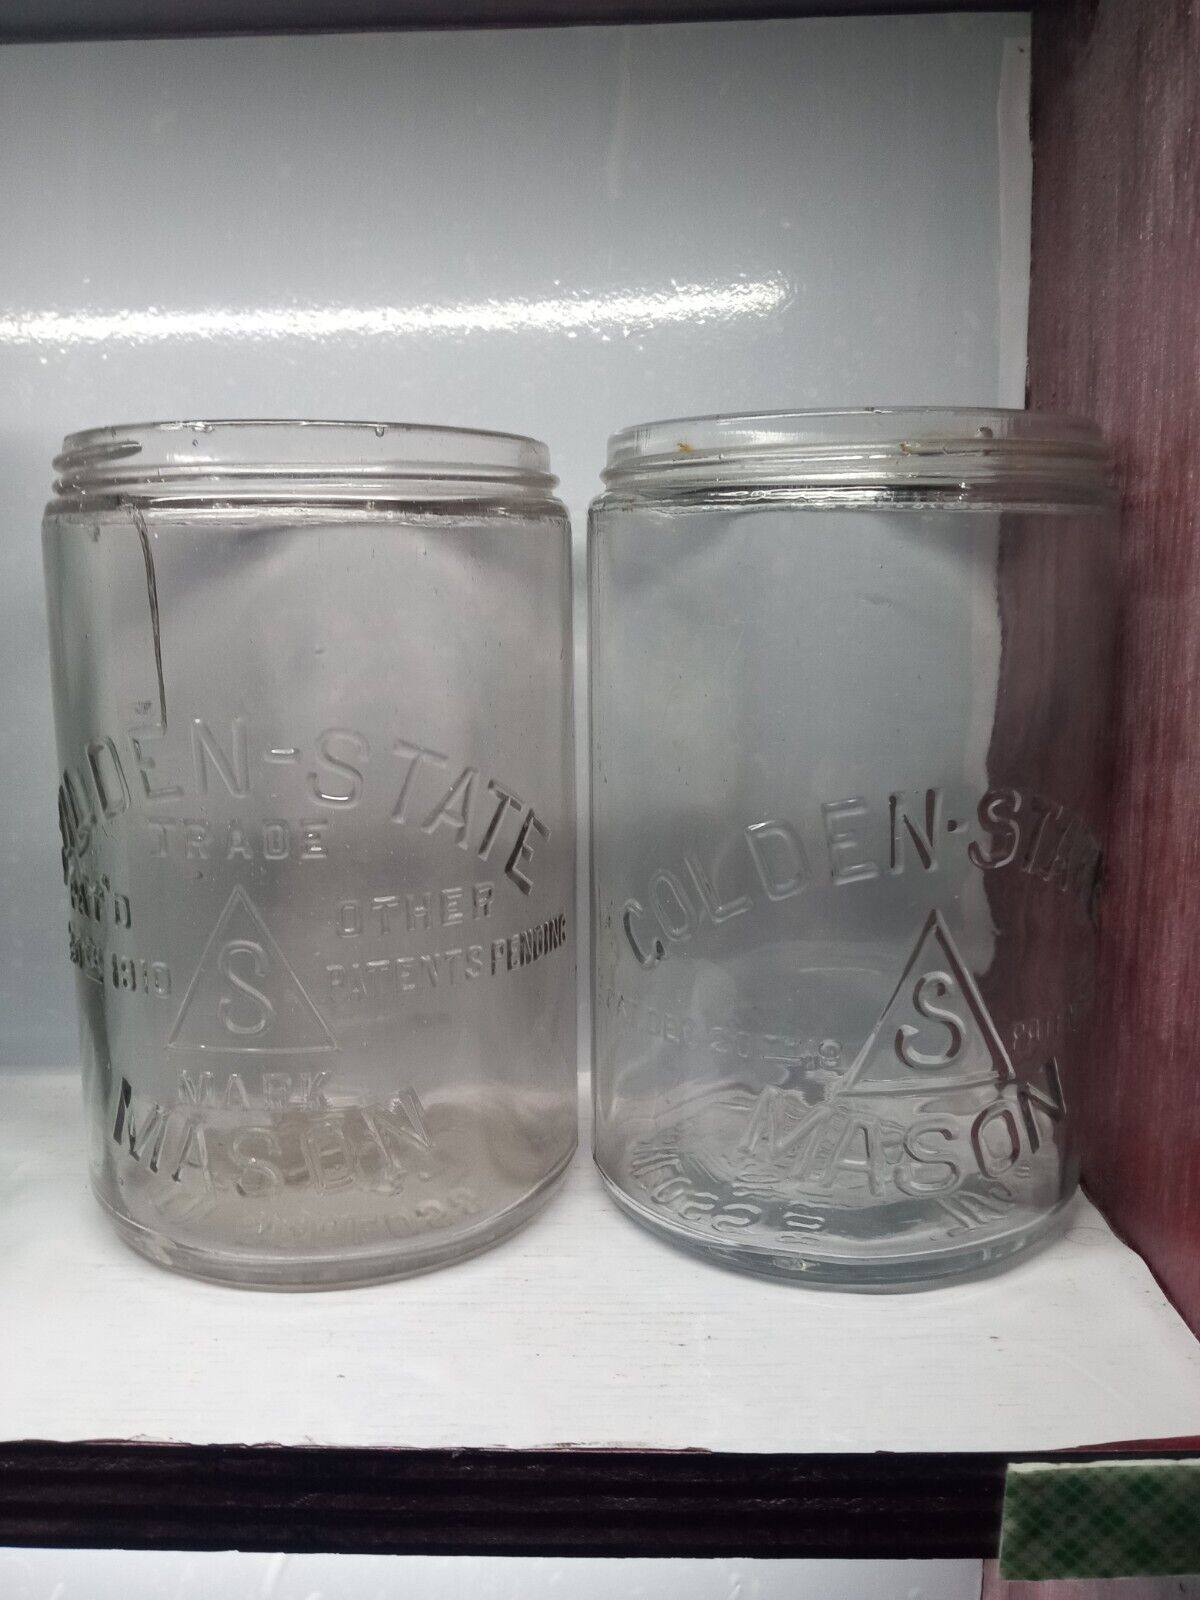 2 Vintage Golden State  Mason Jars,  Ben Schloss, S In Triangle, Patents Pending